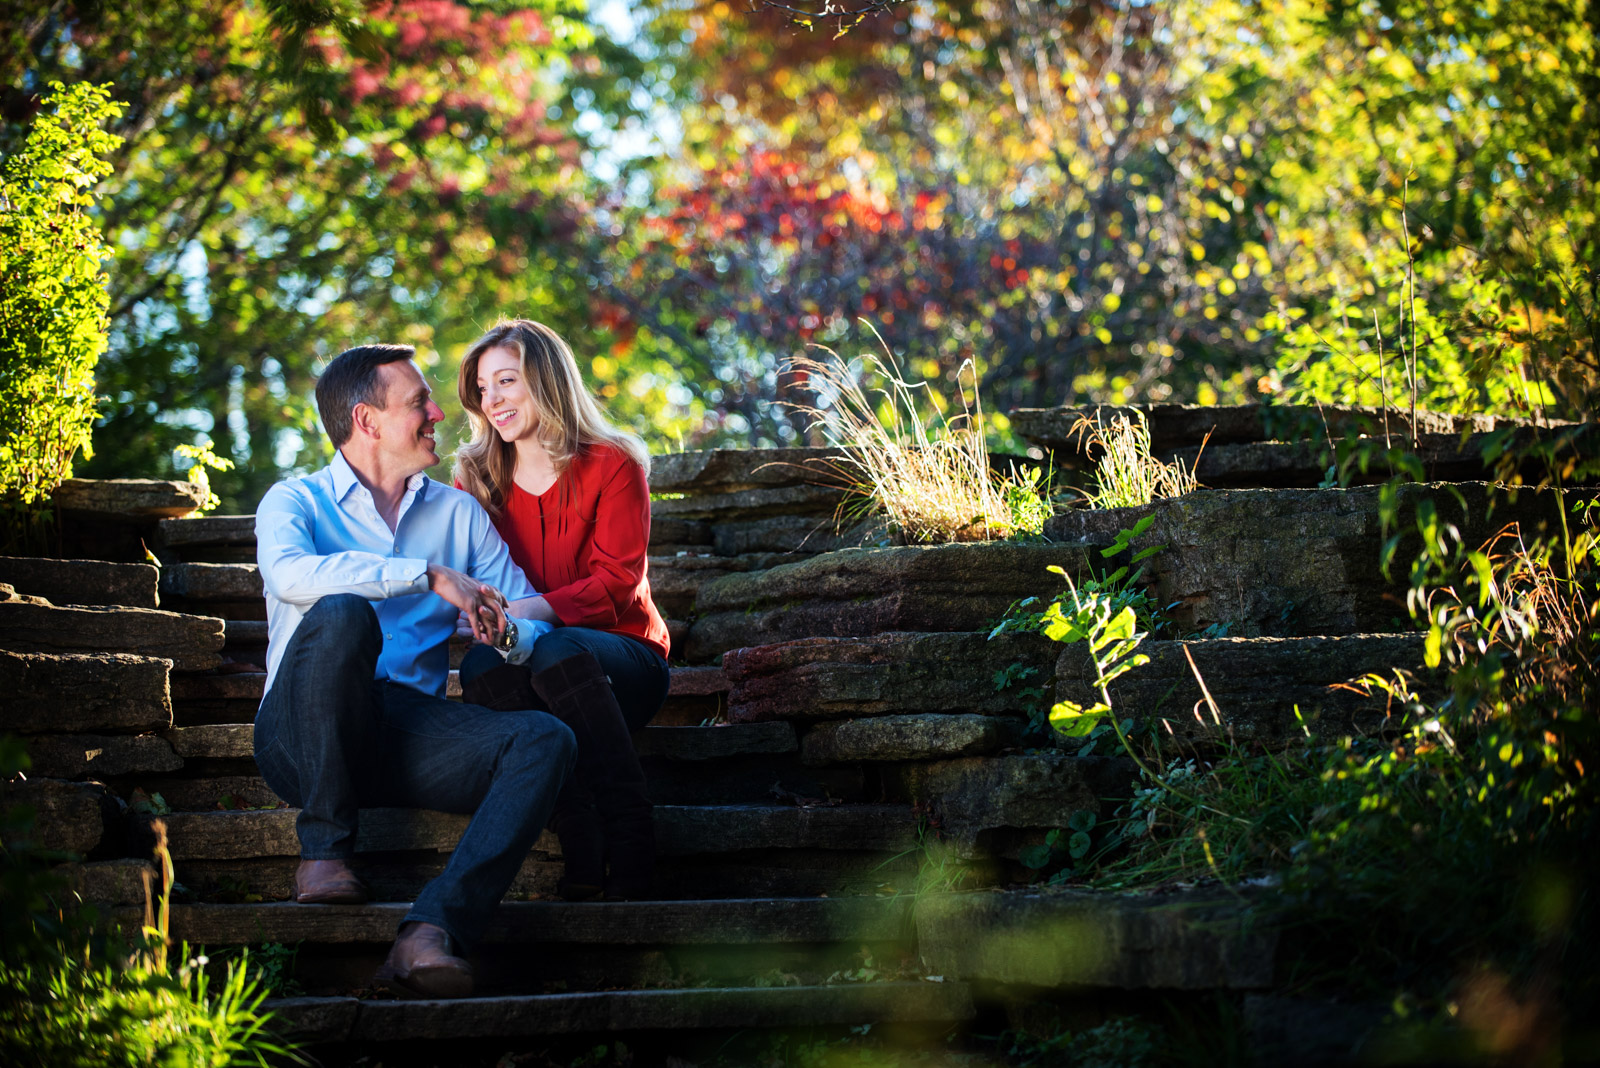 Chicago Engagement Session in the Fall with colorful leaves changing colors